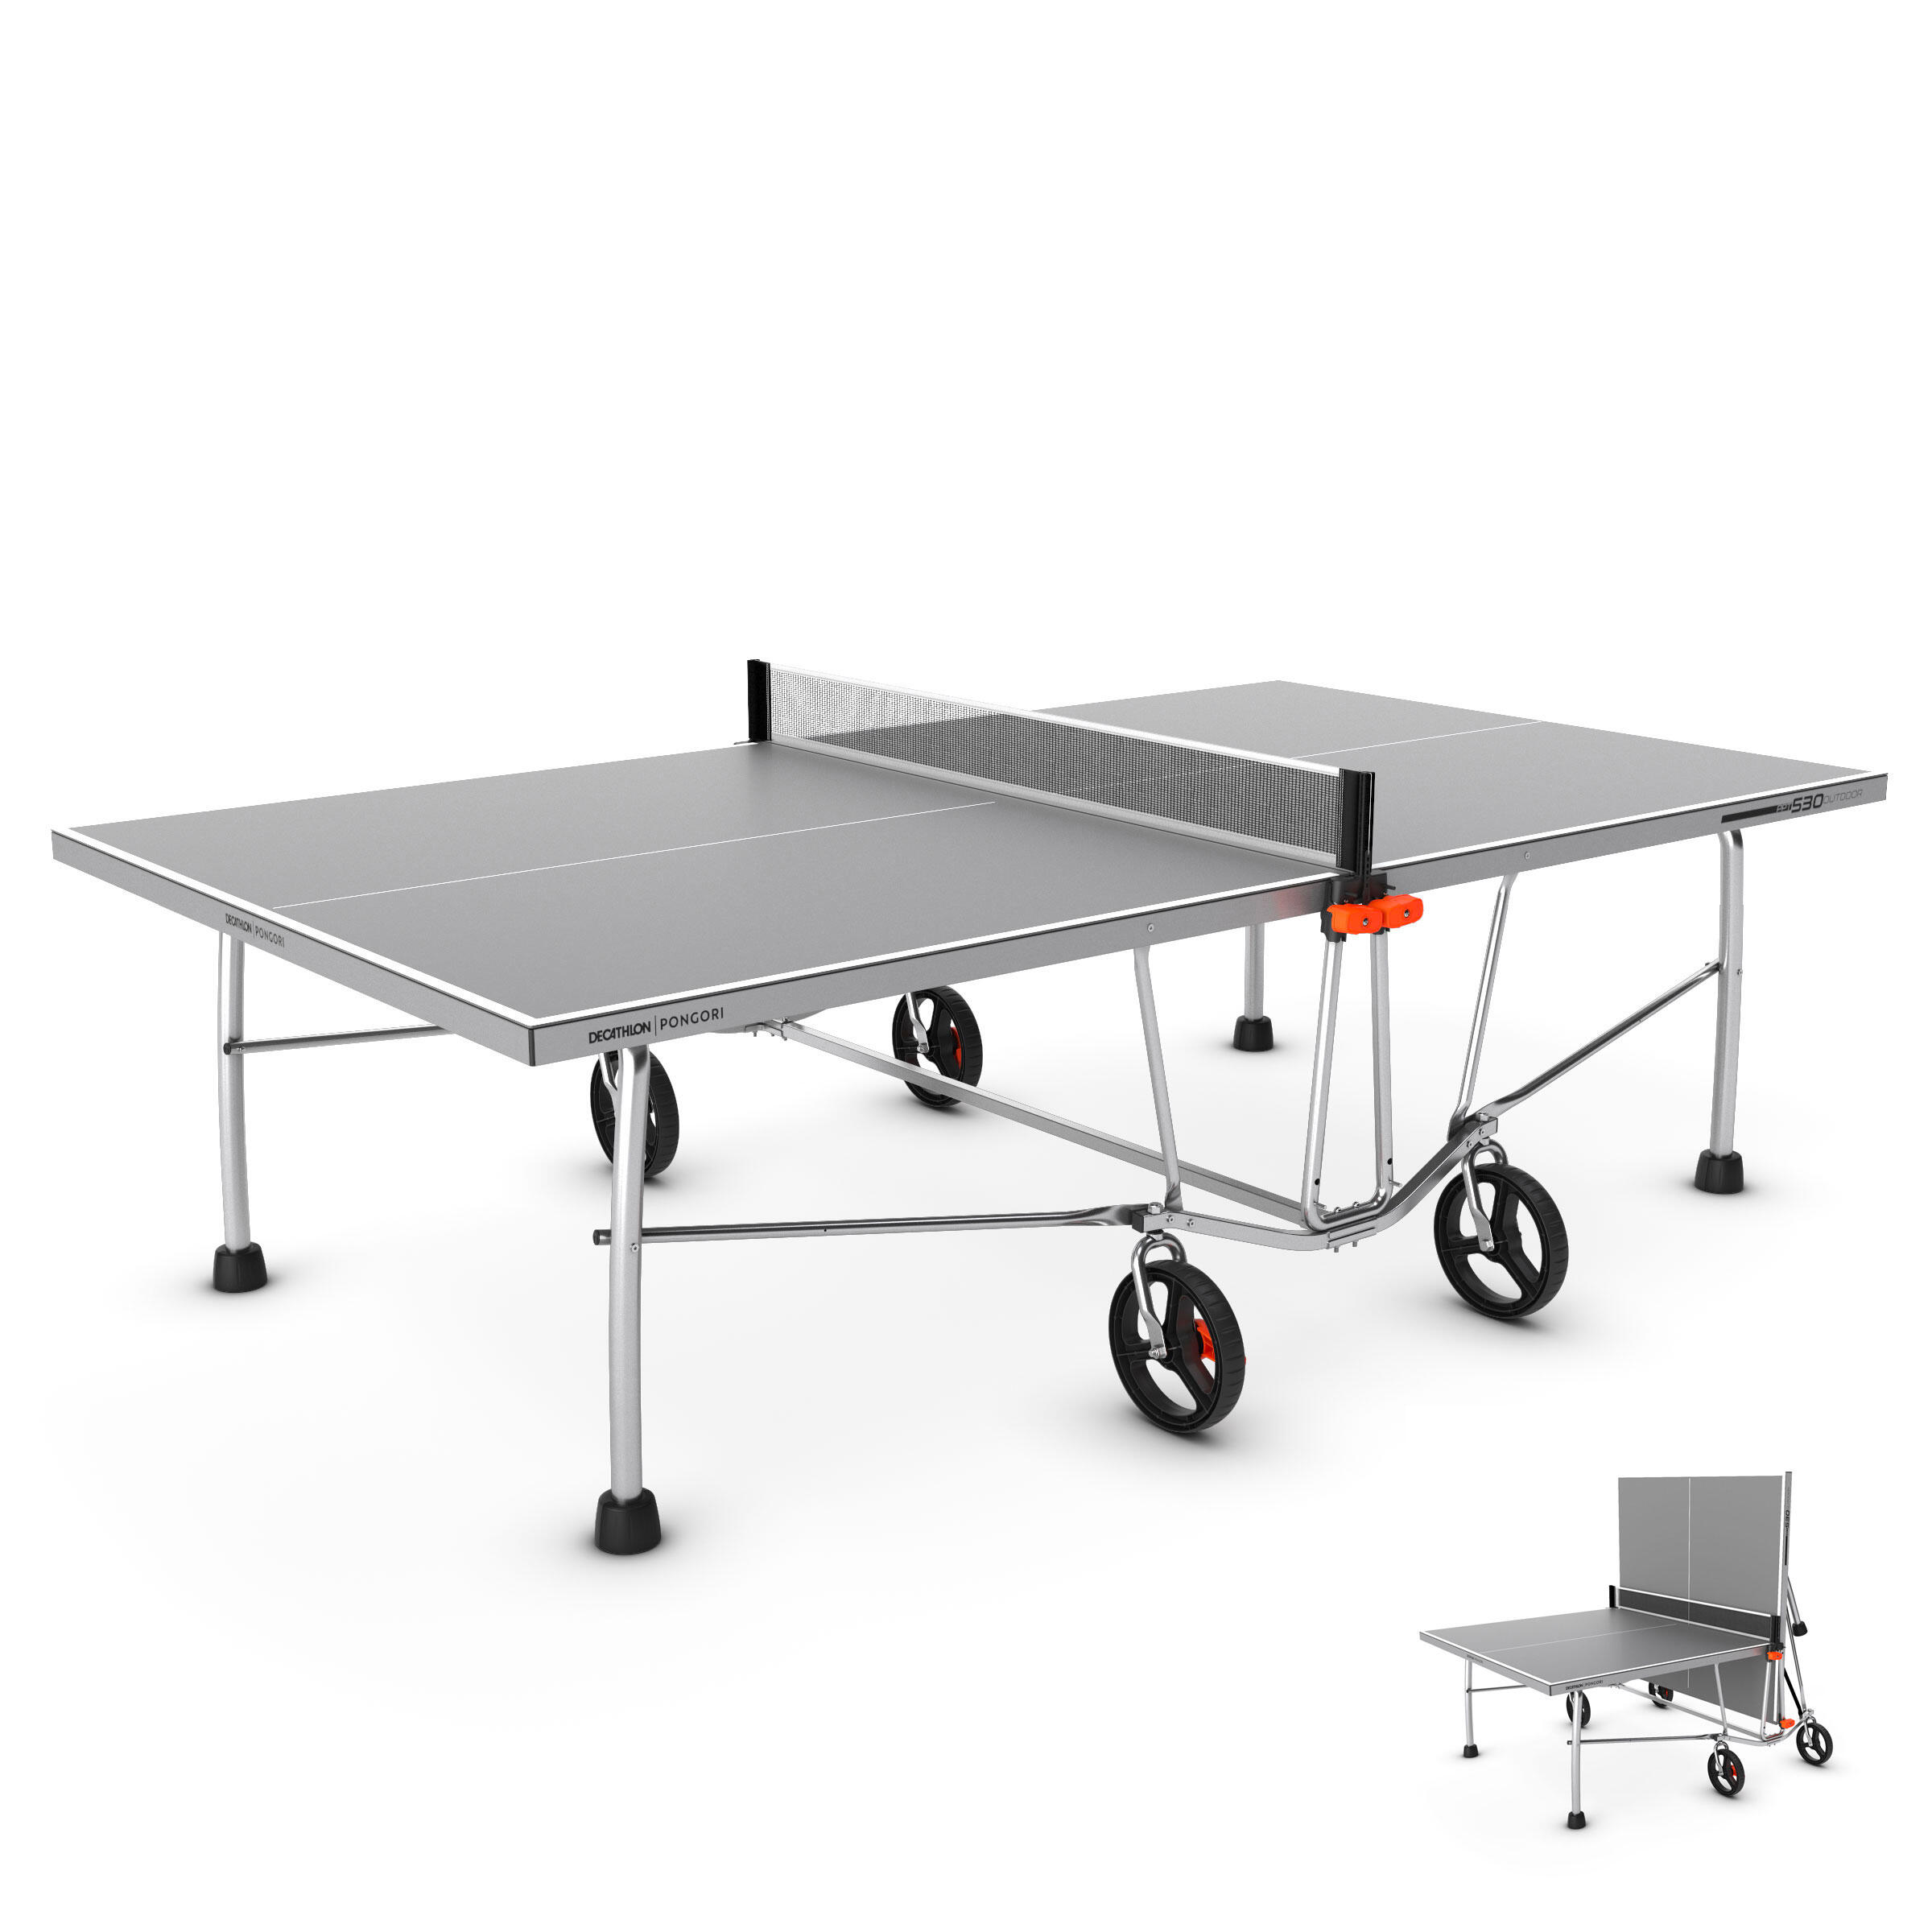 Outdoor Table Tennis Table PPT 530 - Grey 1/12